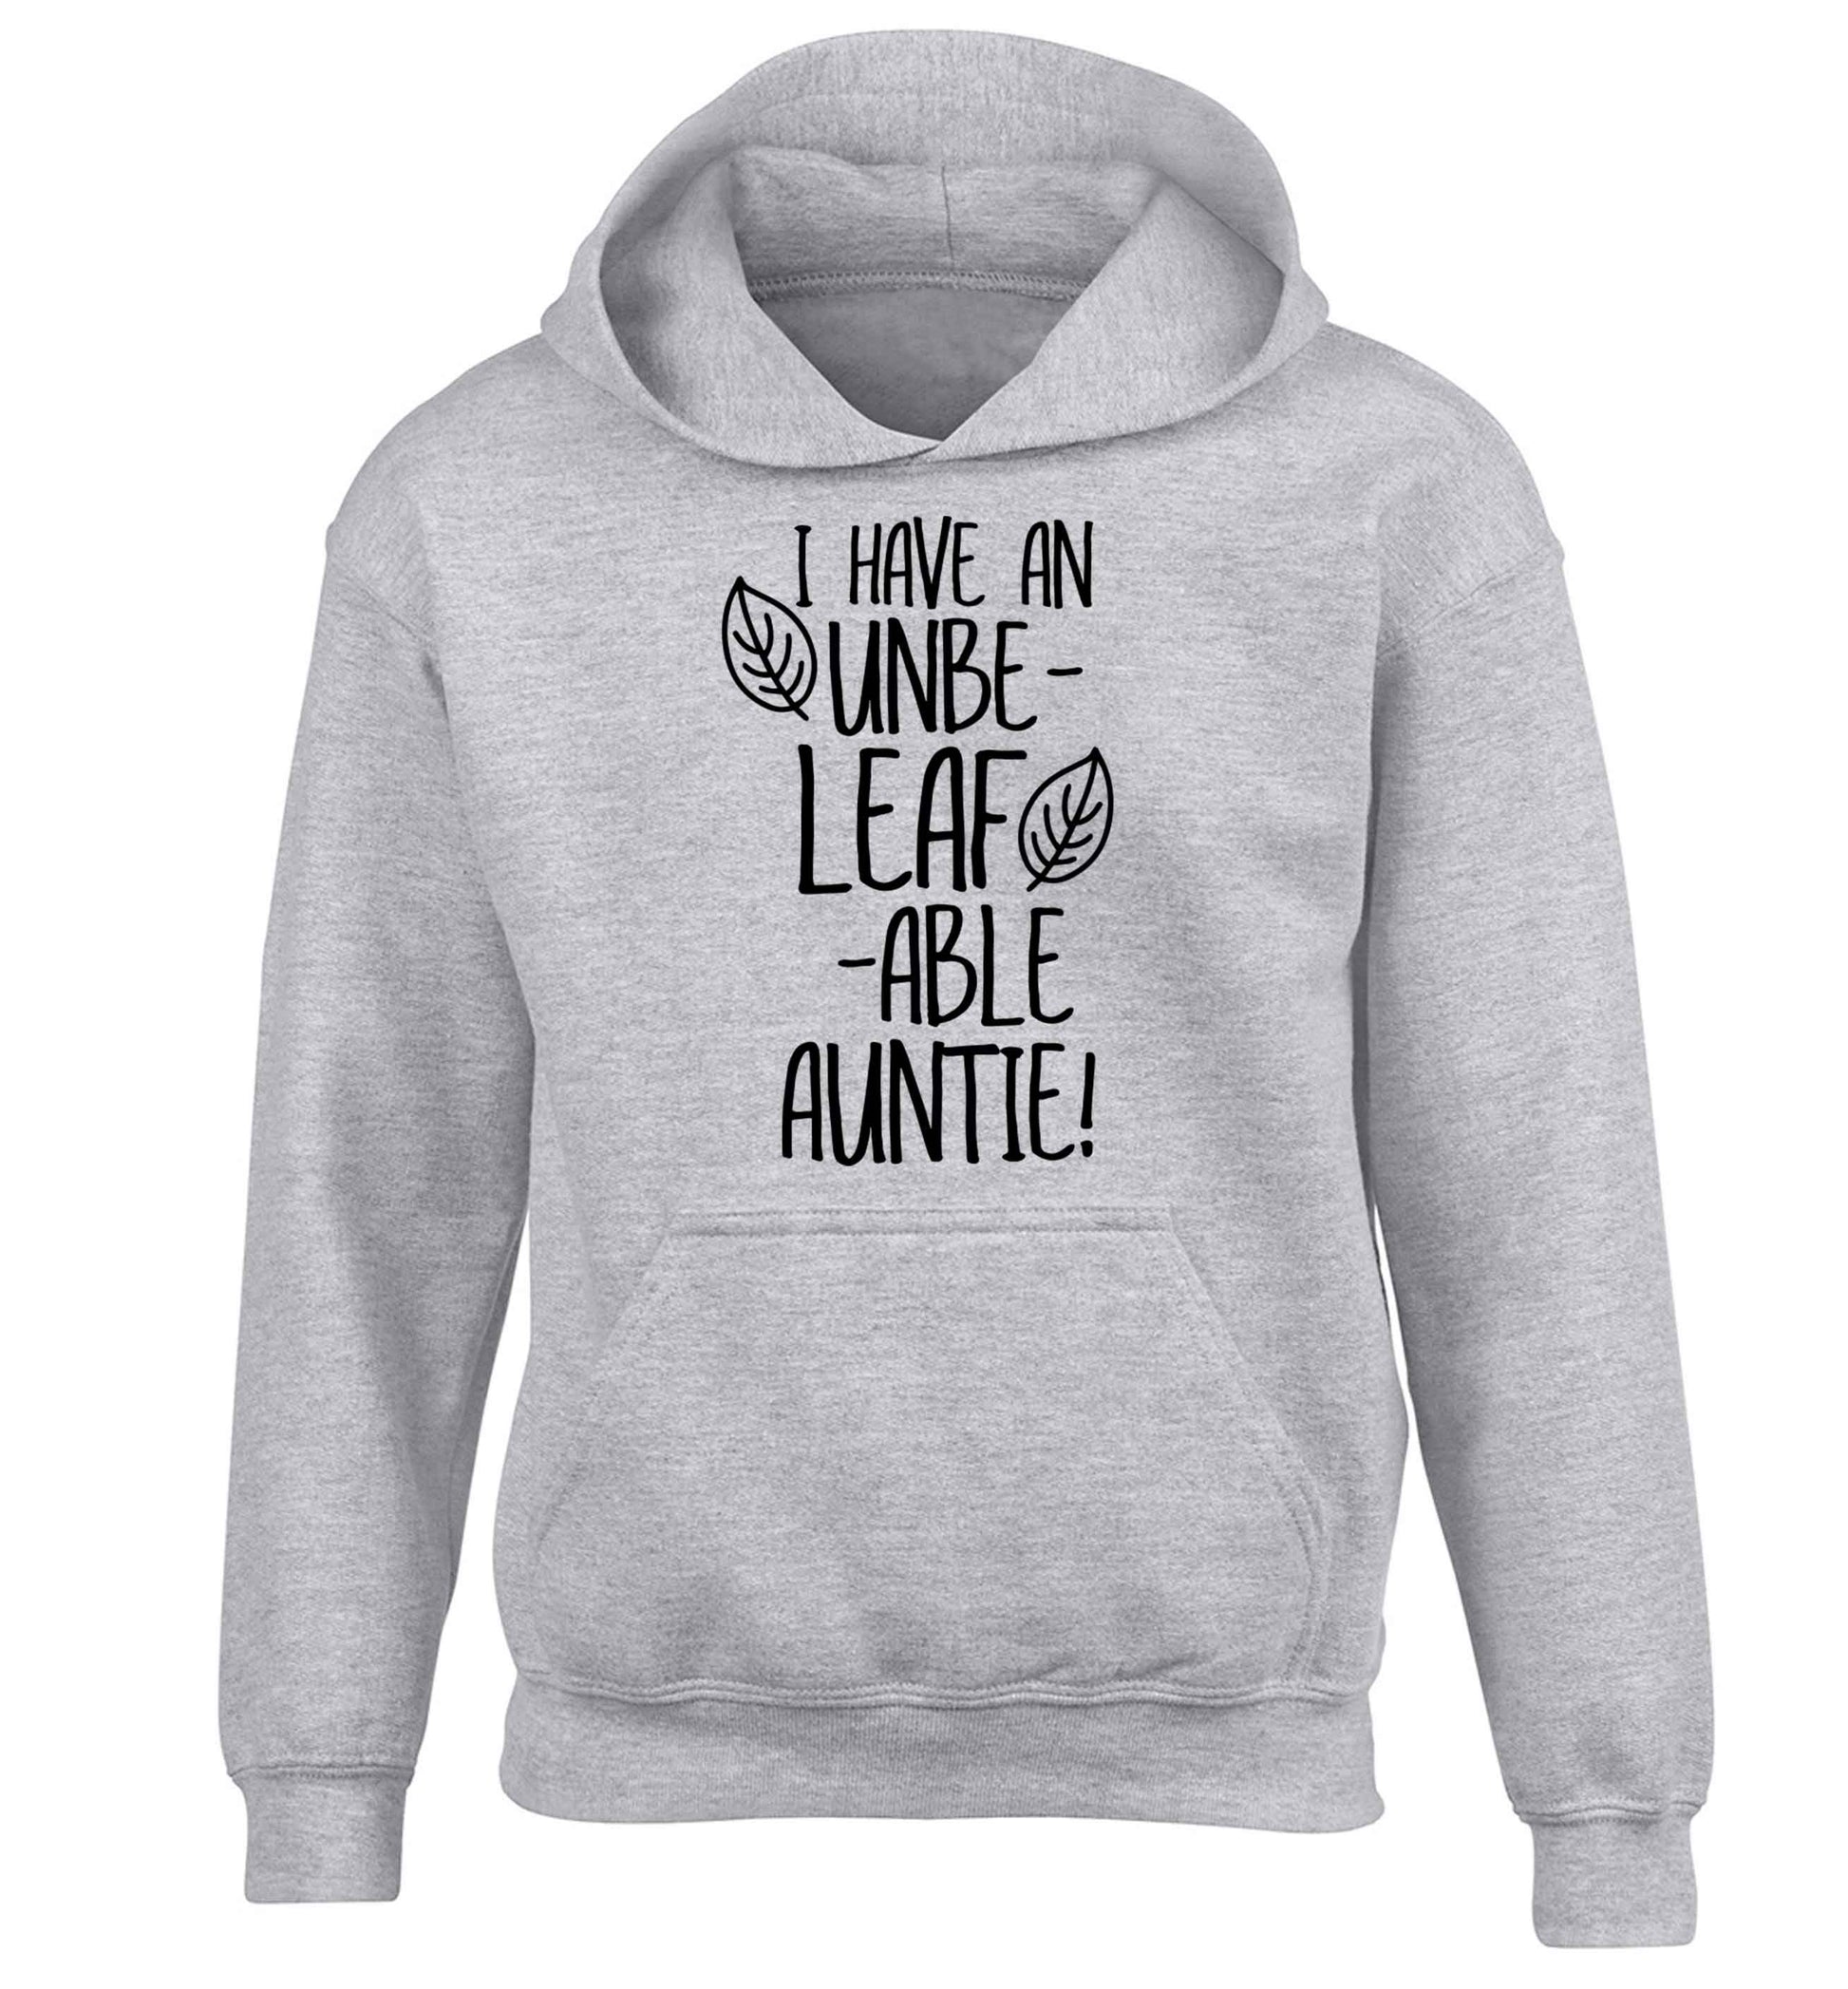 I have an unbe-leaf-able auntie children's grey hoodie 12-13 Years